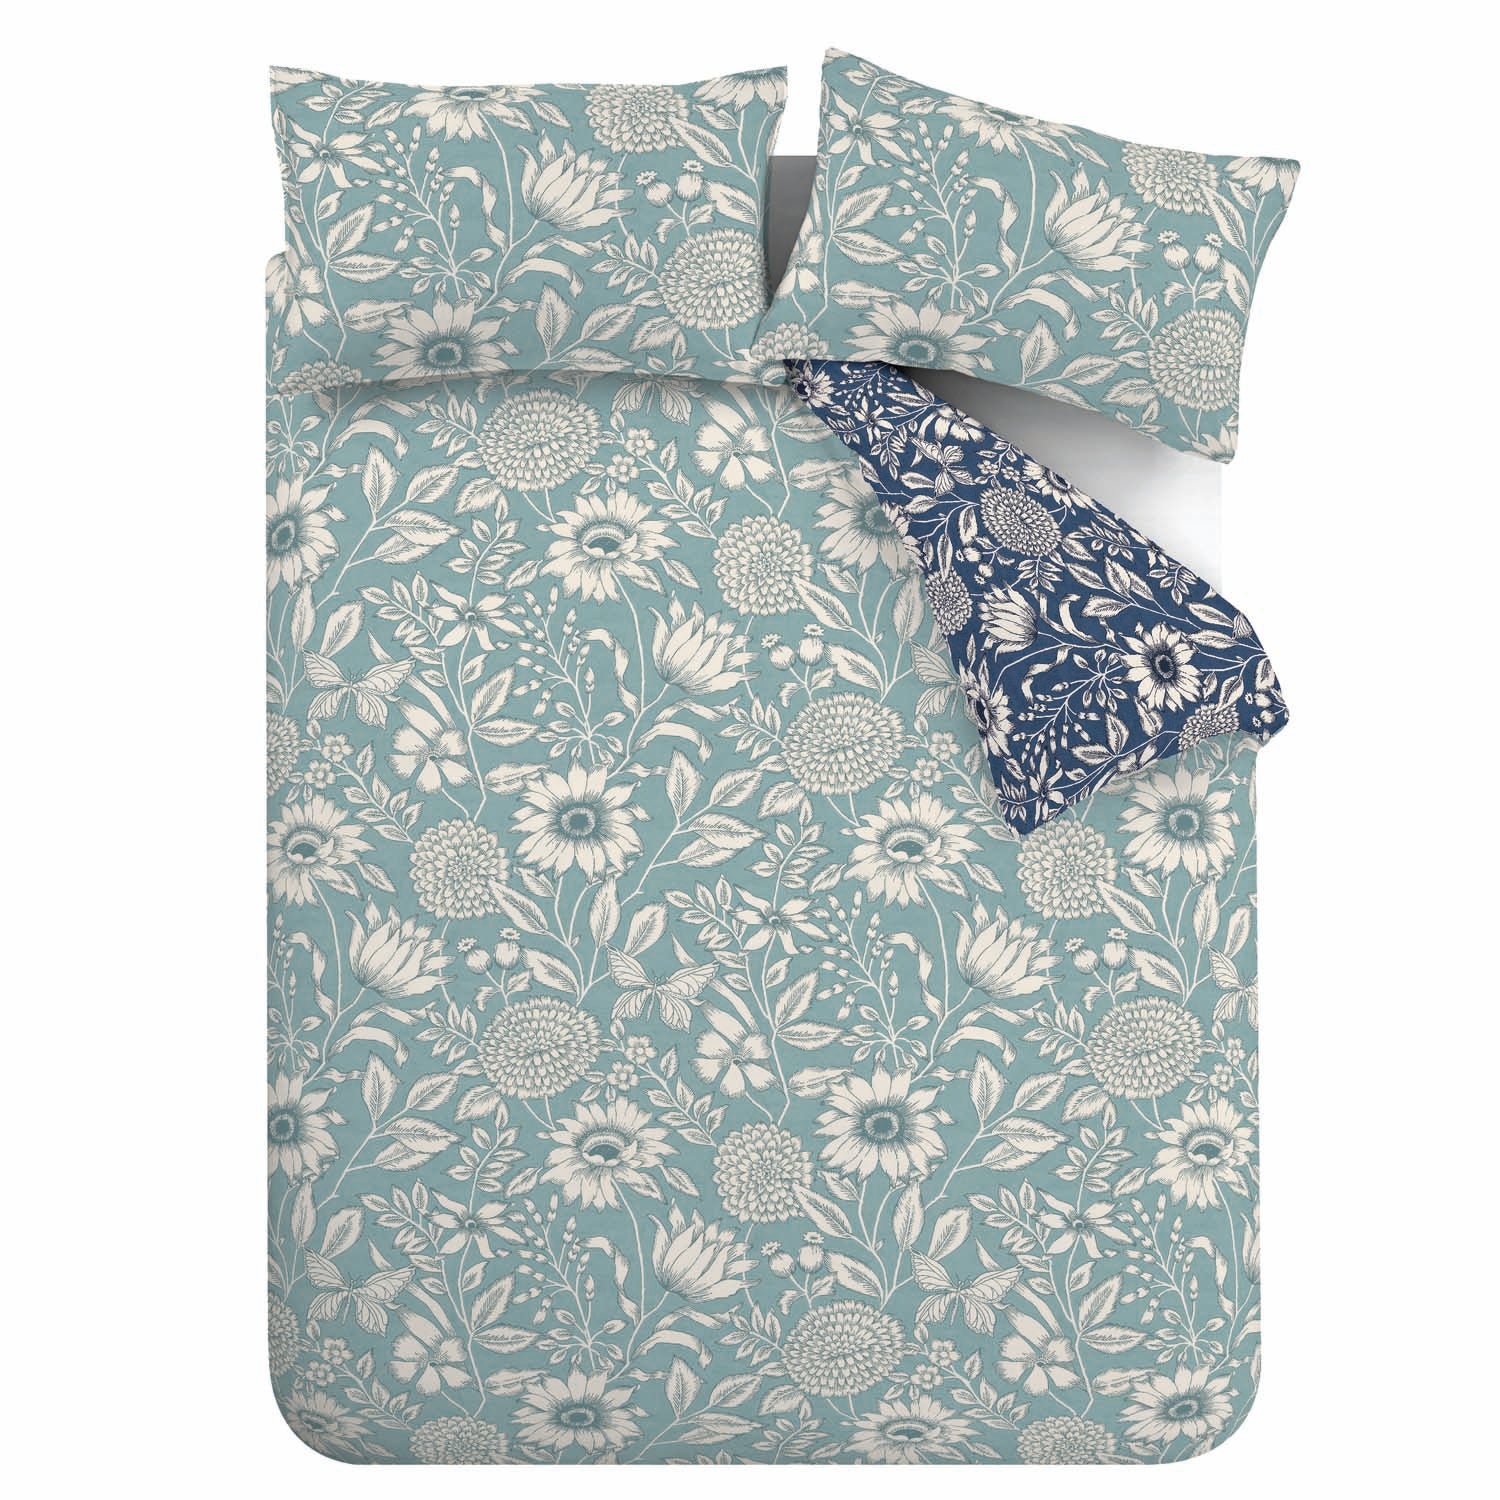  Catherine Lansfield Tapestry Floral Easy Care Duvet Cover Set - Blue 5 Shaws Department Stores